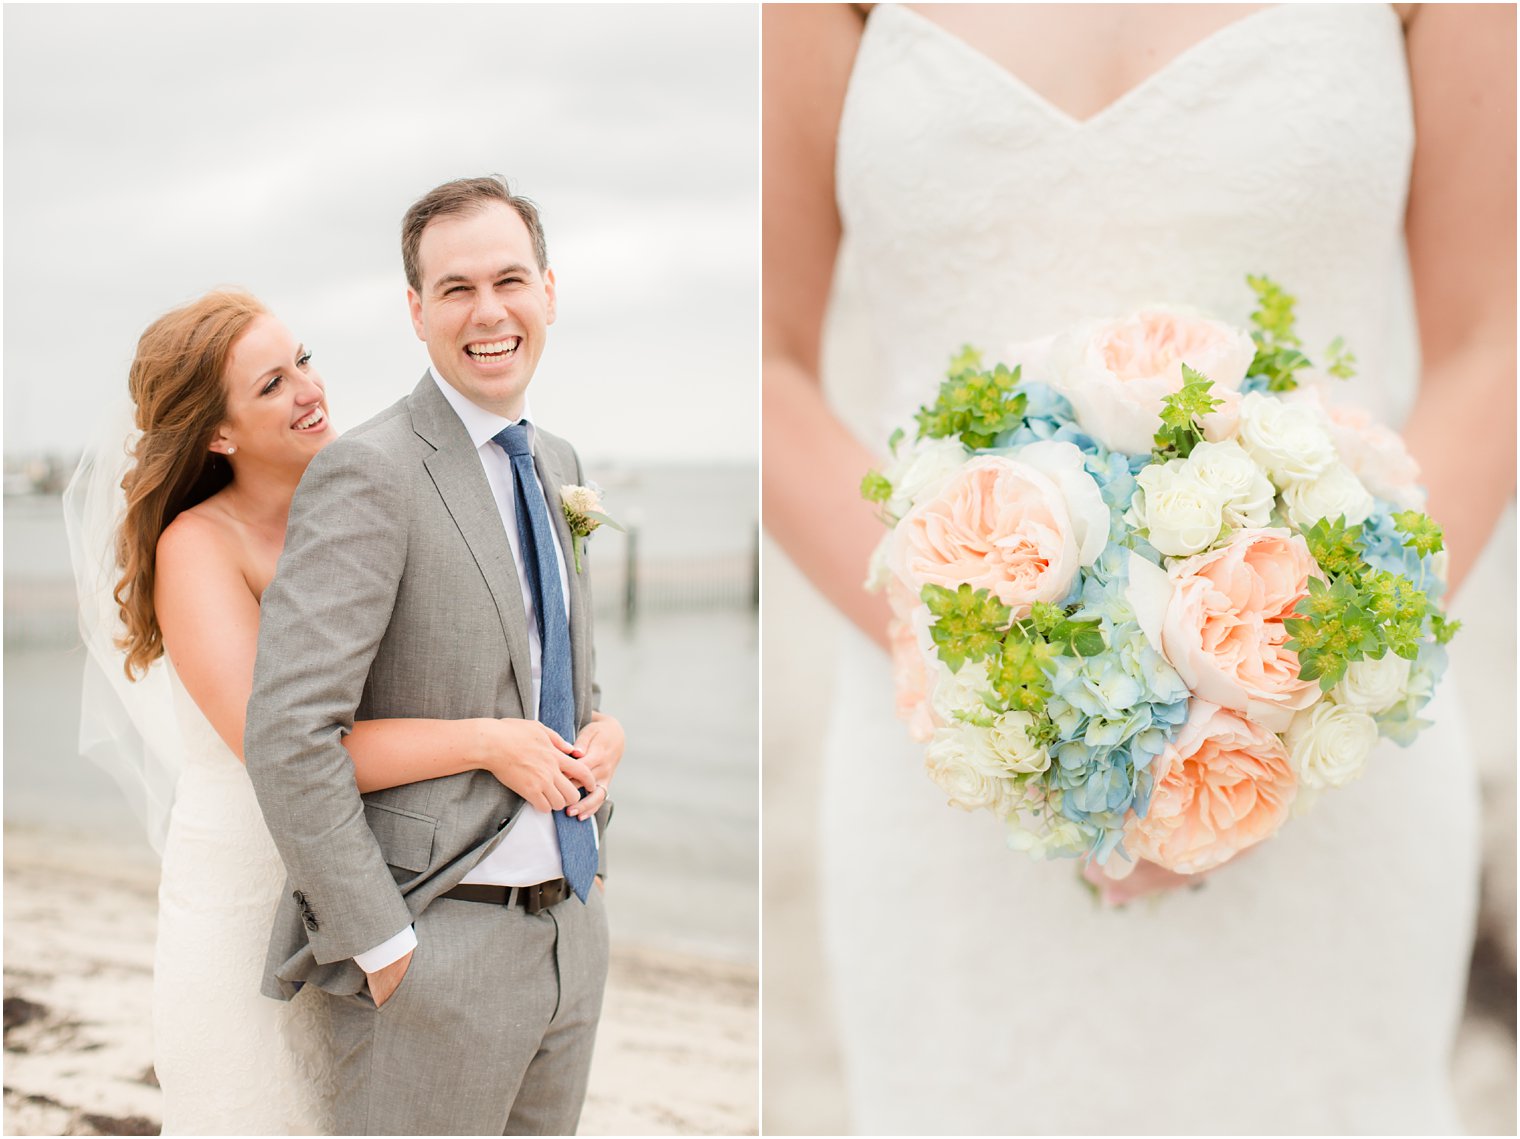 peach and blue wedding bouquet by Lily in the Valley photographed by Idalia Photography